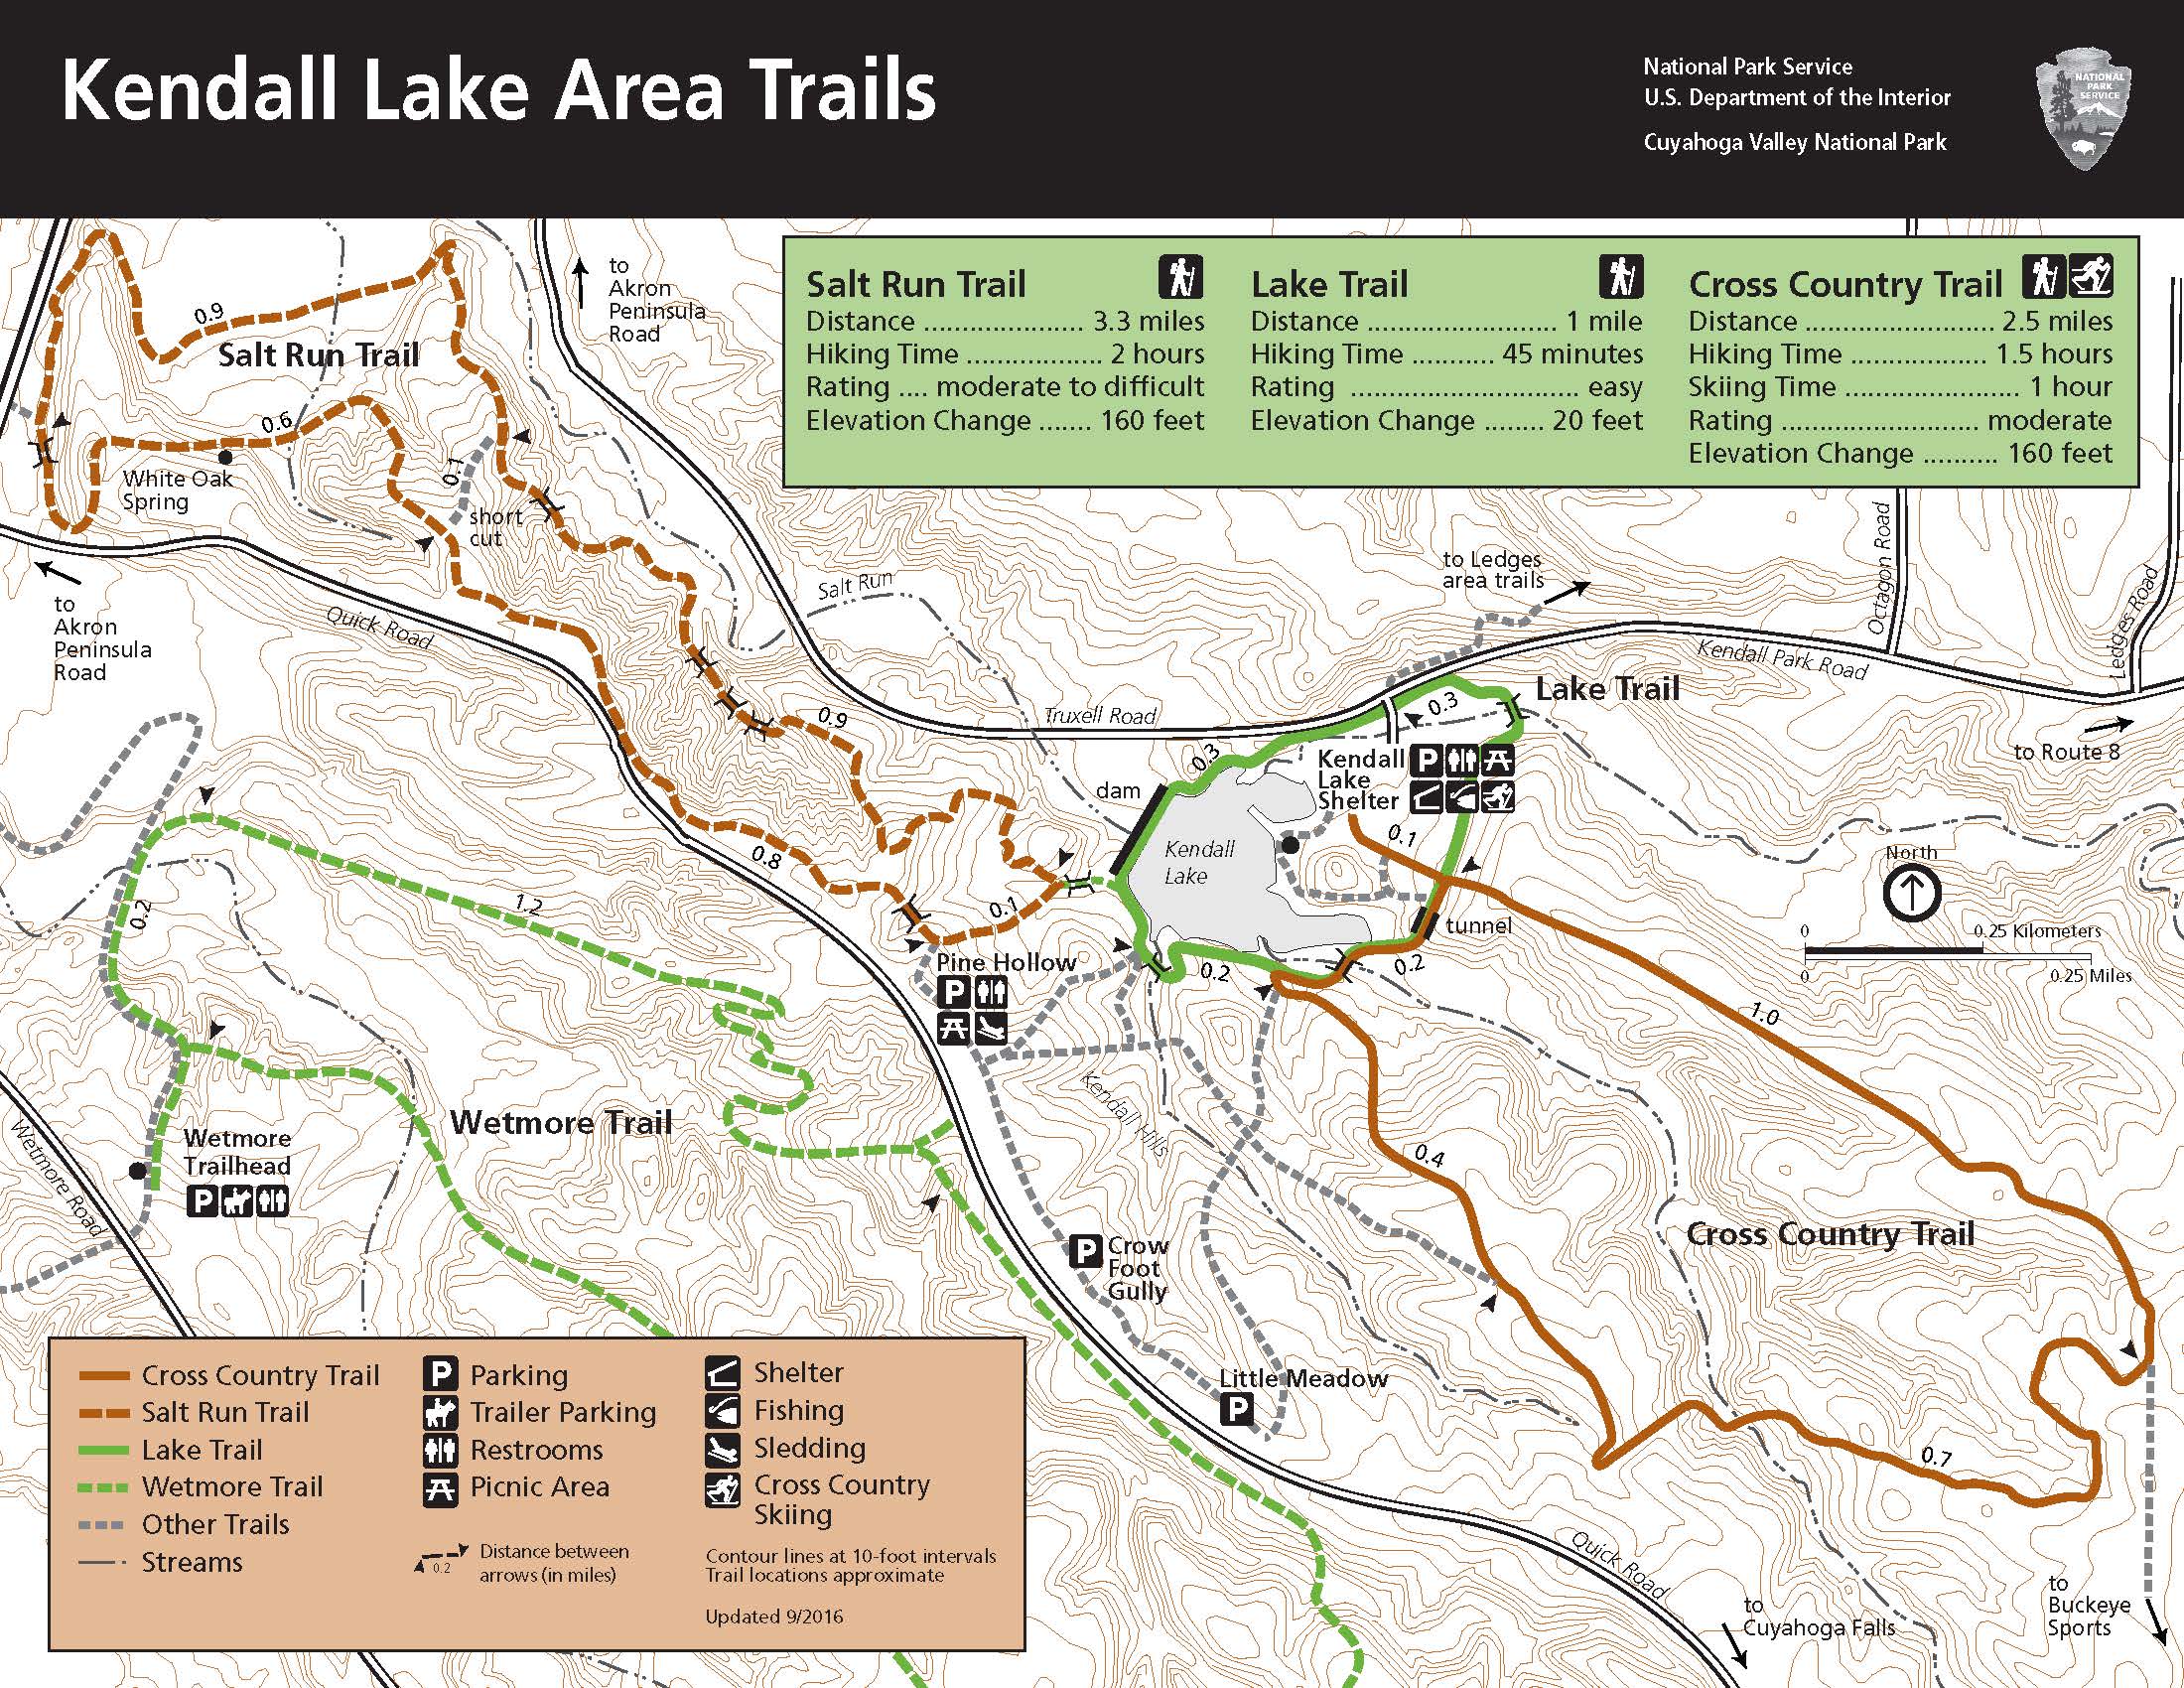 Area Map Of The Kendall Lake Trails. - Area map of the Kendall Lake trails.